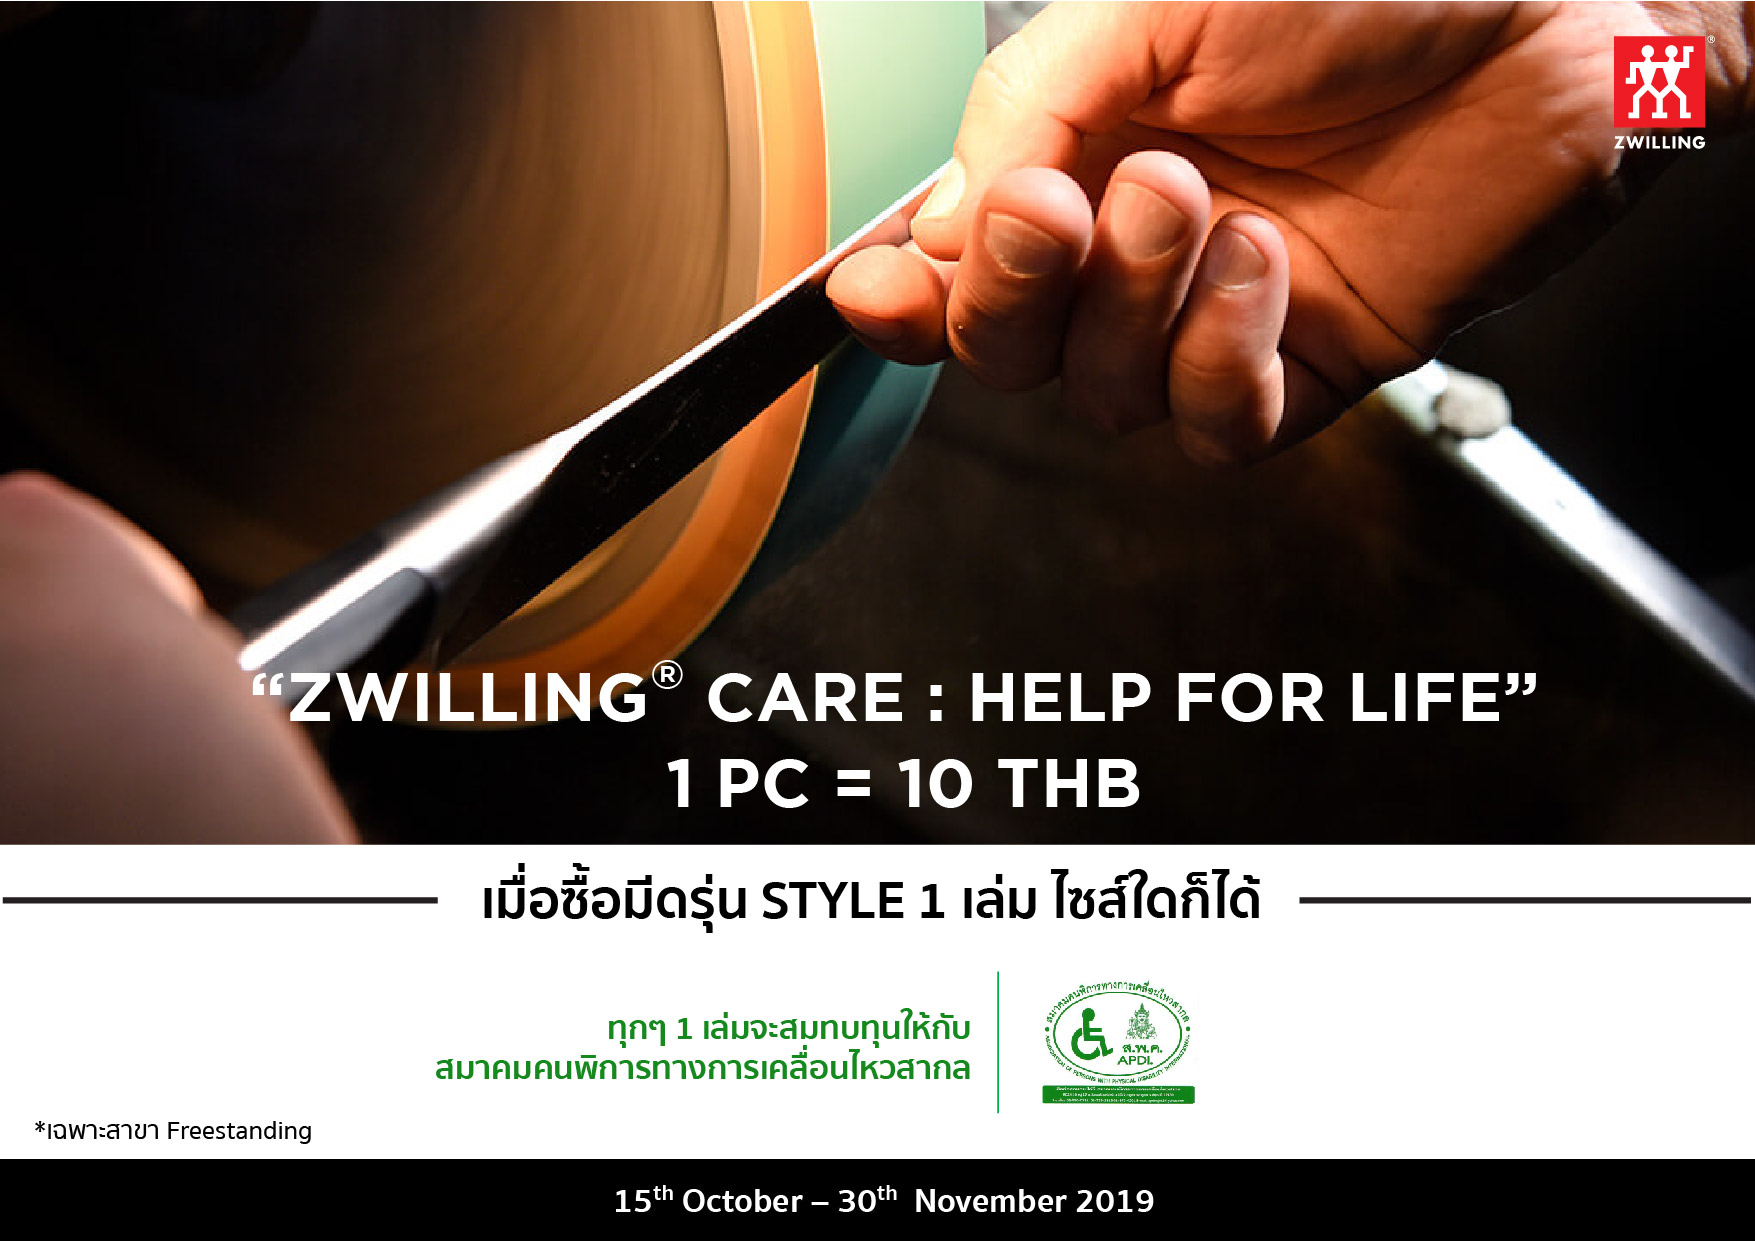 ZWILLING HELP FOR LIFE